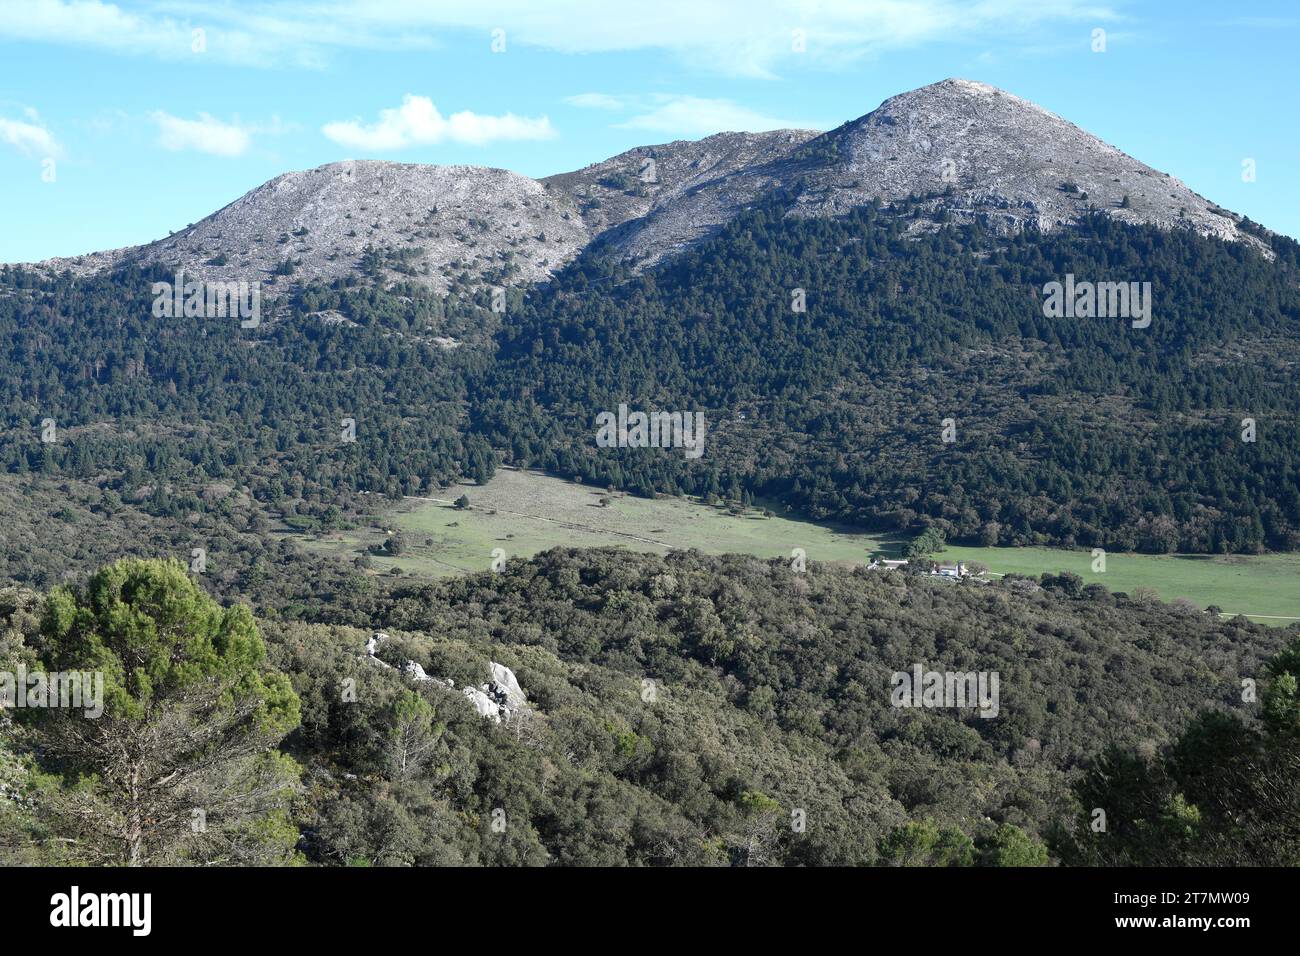 Spanish fir or pinsapo (Abies pinsapo) evergreen tree endemic to Mountains of Cadiz and Malaga. This photo was taken in Los Quejigales, Sierra de las Stock Photo